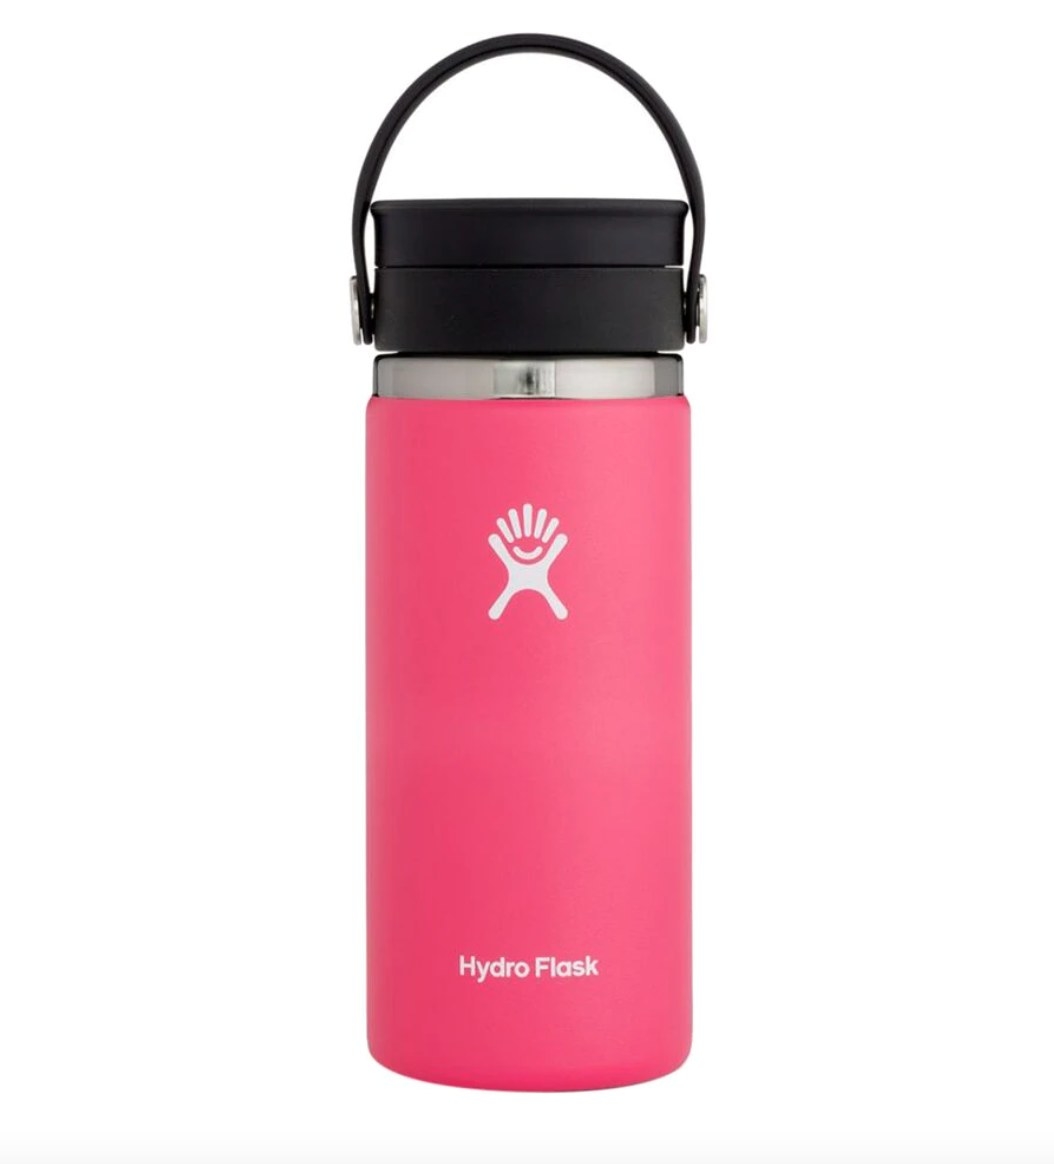 the Hydro flask wide mouth bottle in pink